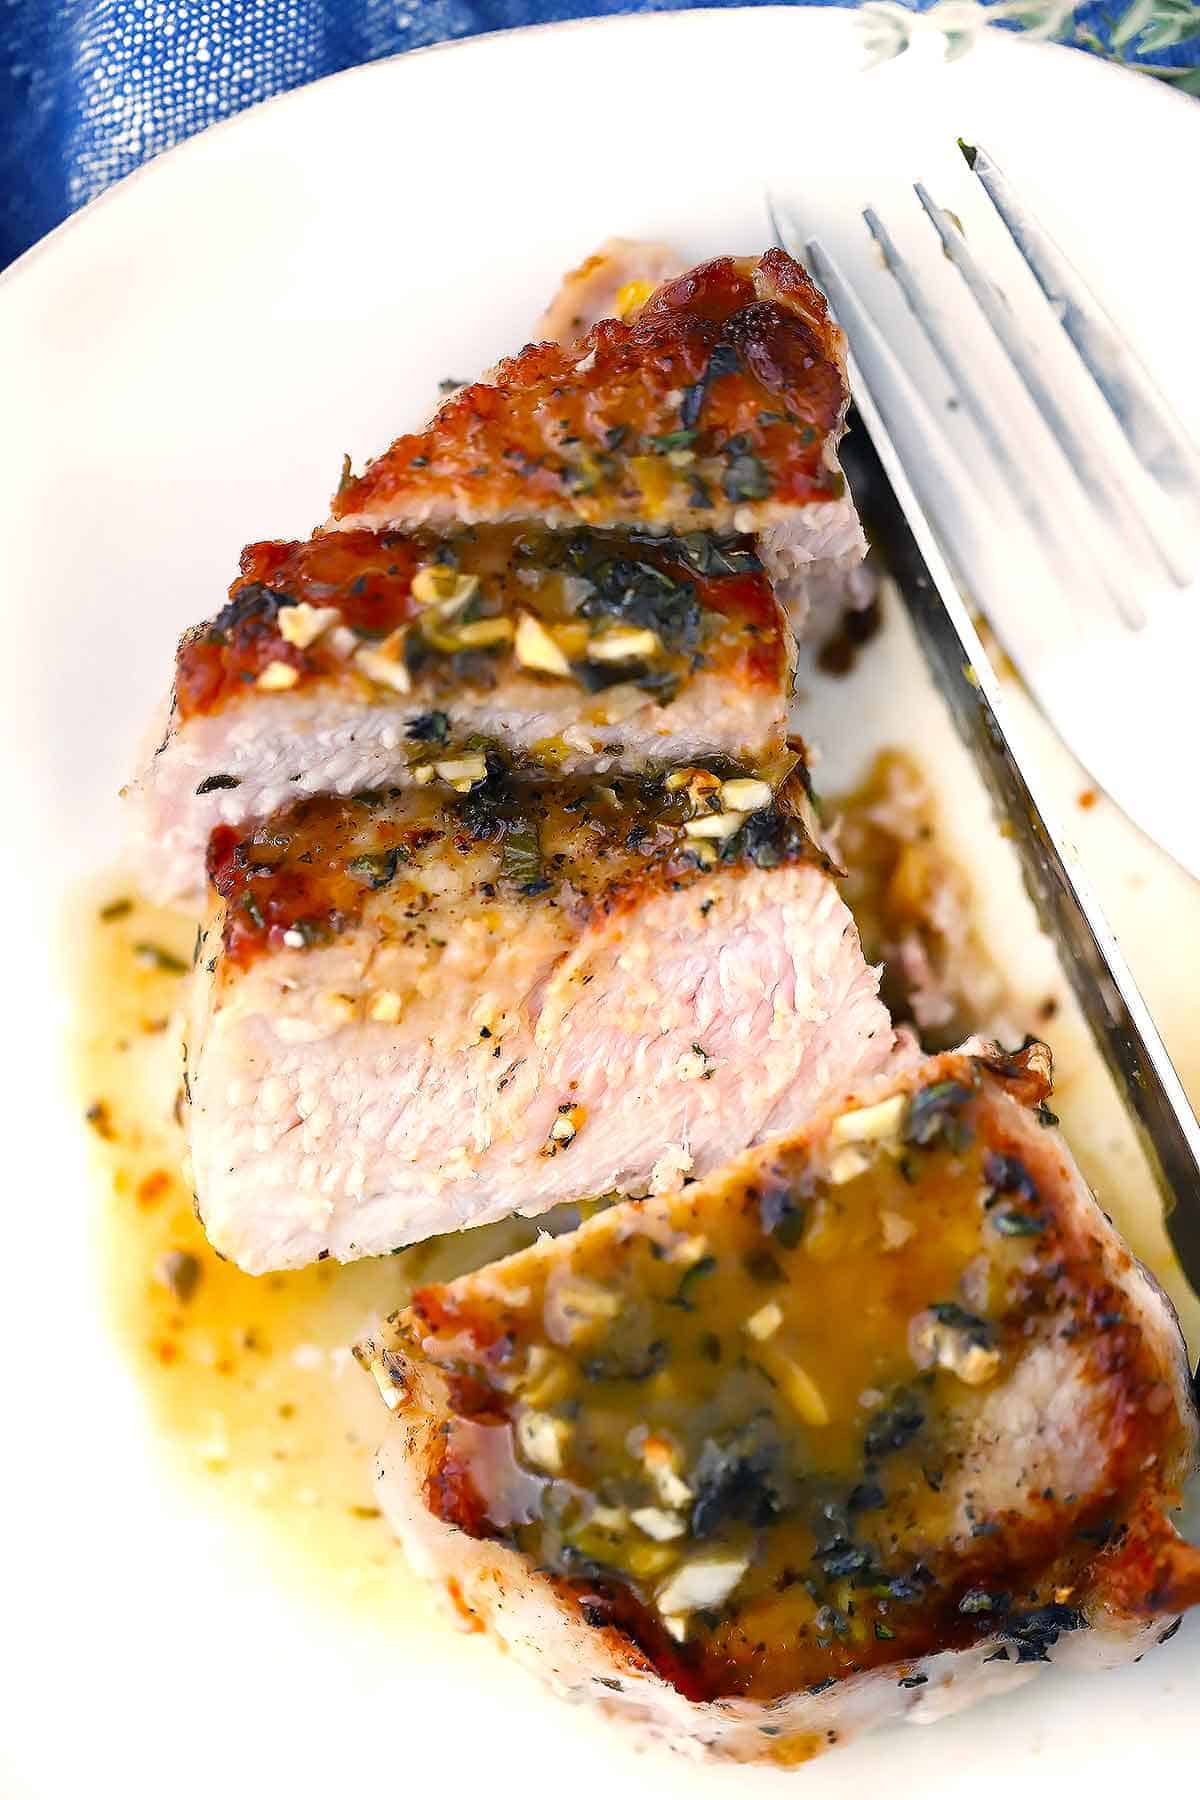 An oven baked pork chop sliced on a plate with pan sauce.